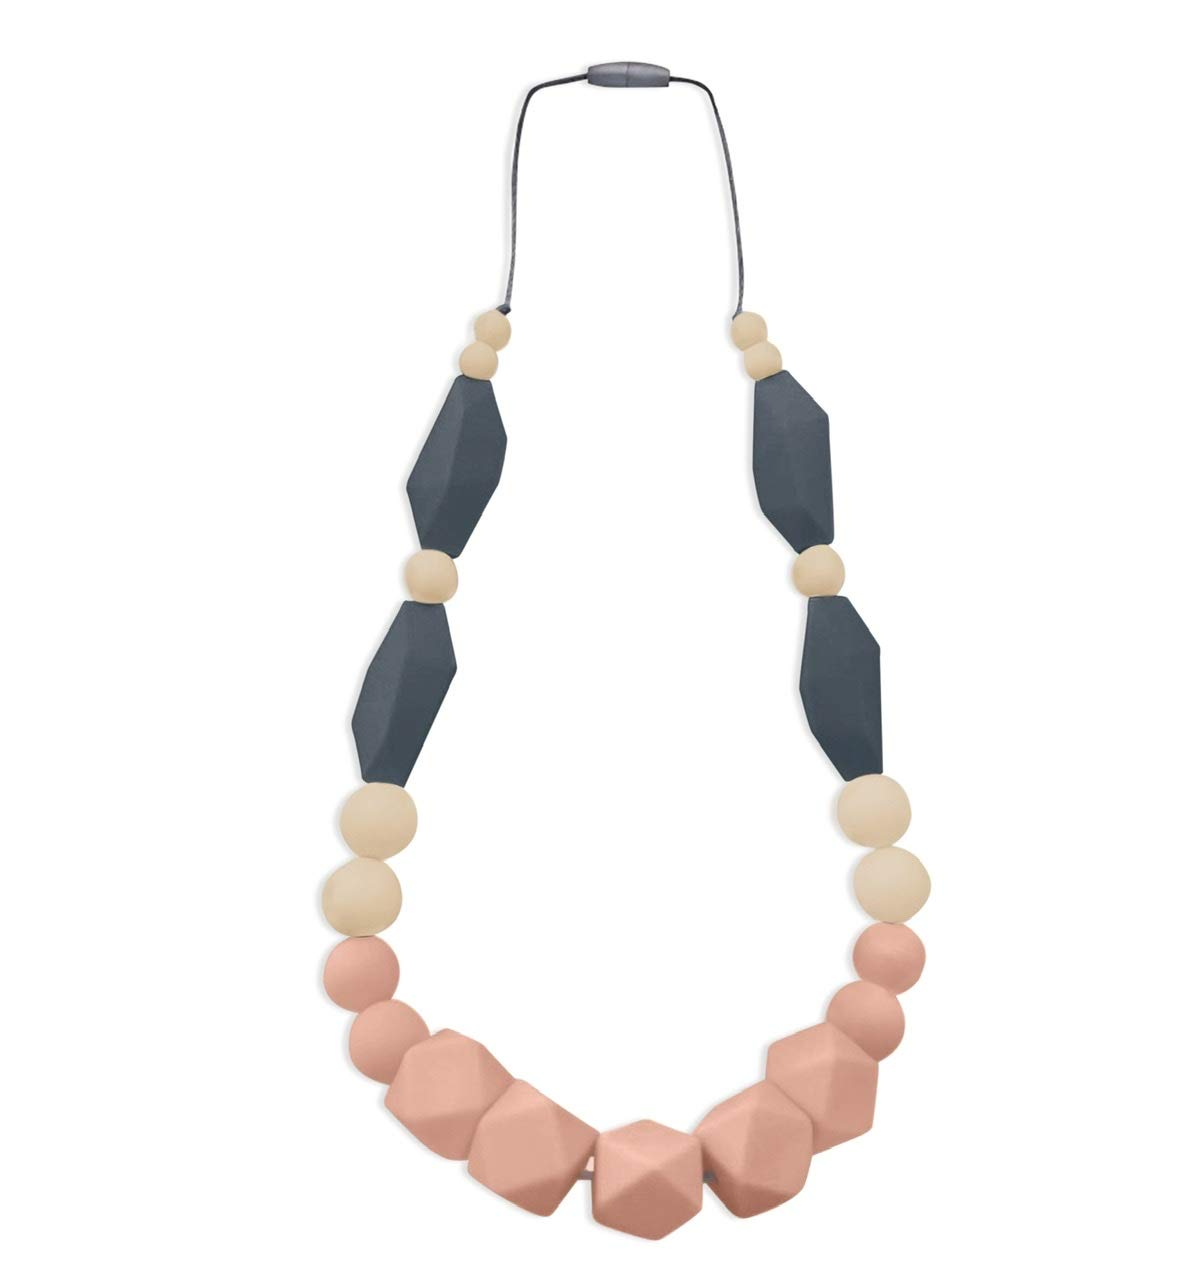 Silicone Teething Necklace for Mom To Wear (Blue/Marble/Grey) – ReignDrop